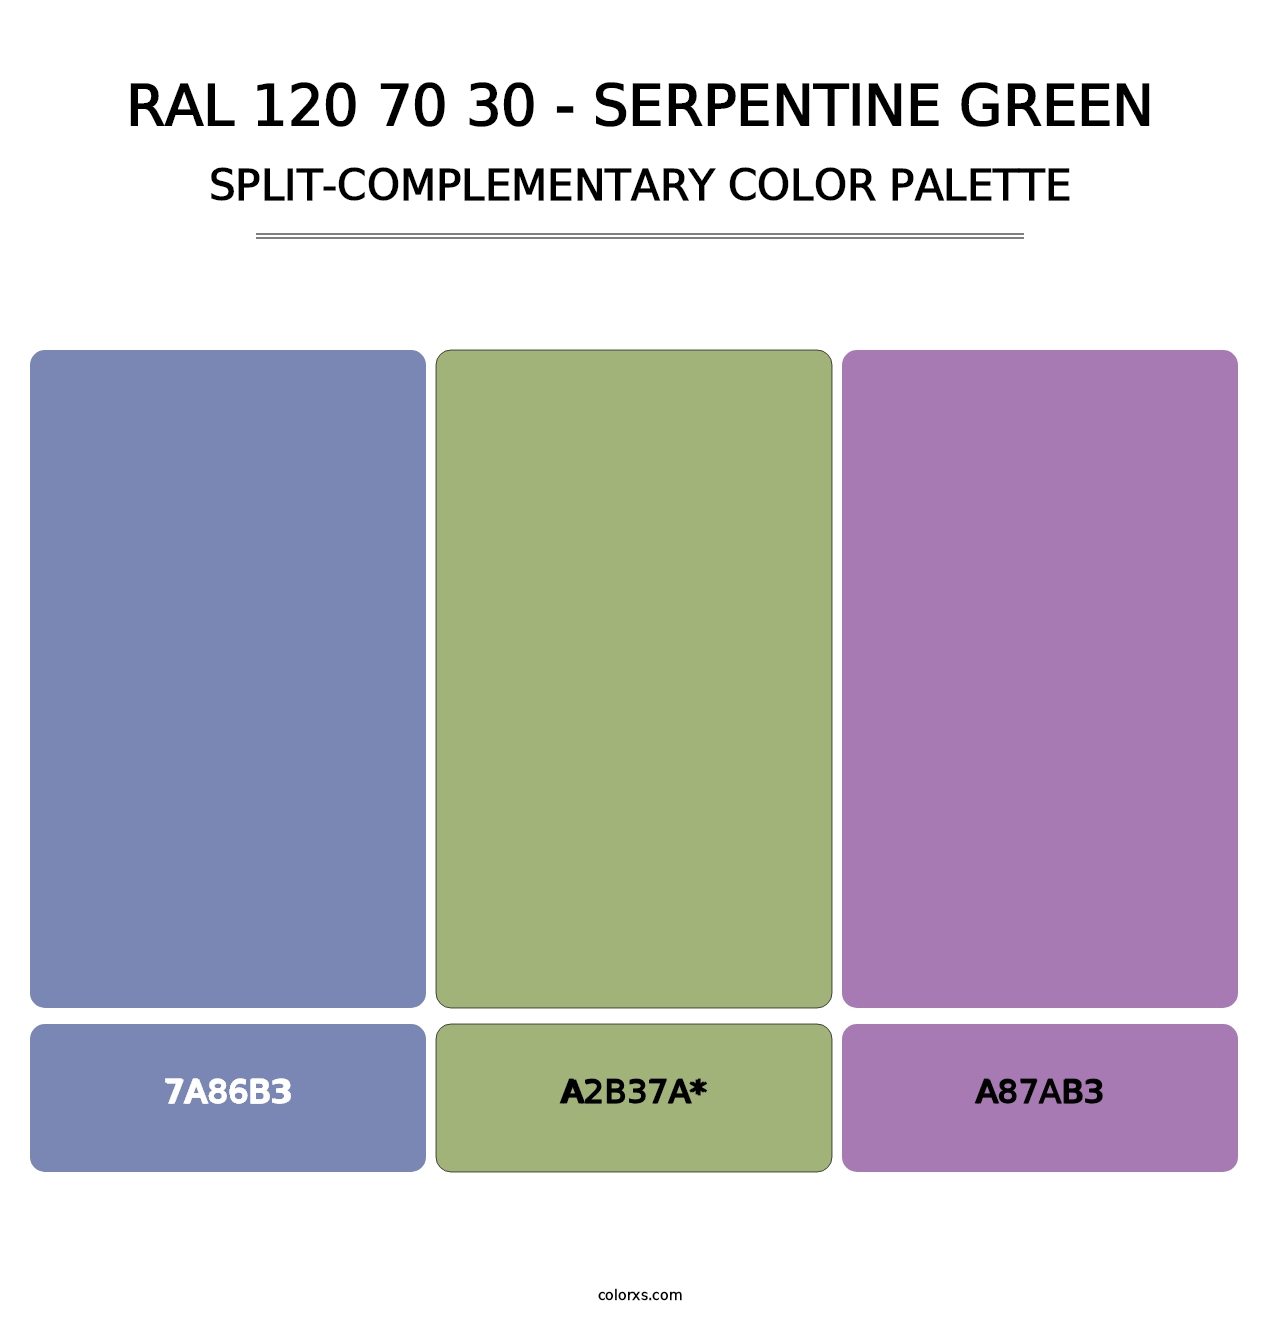 RAL 120 70 30 - Serpentine Green - Split-Complementary Color Palette